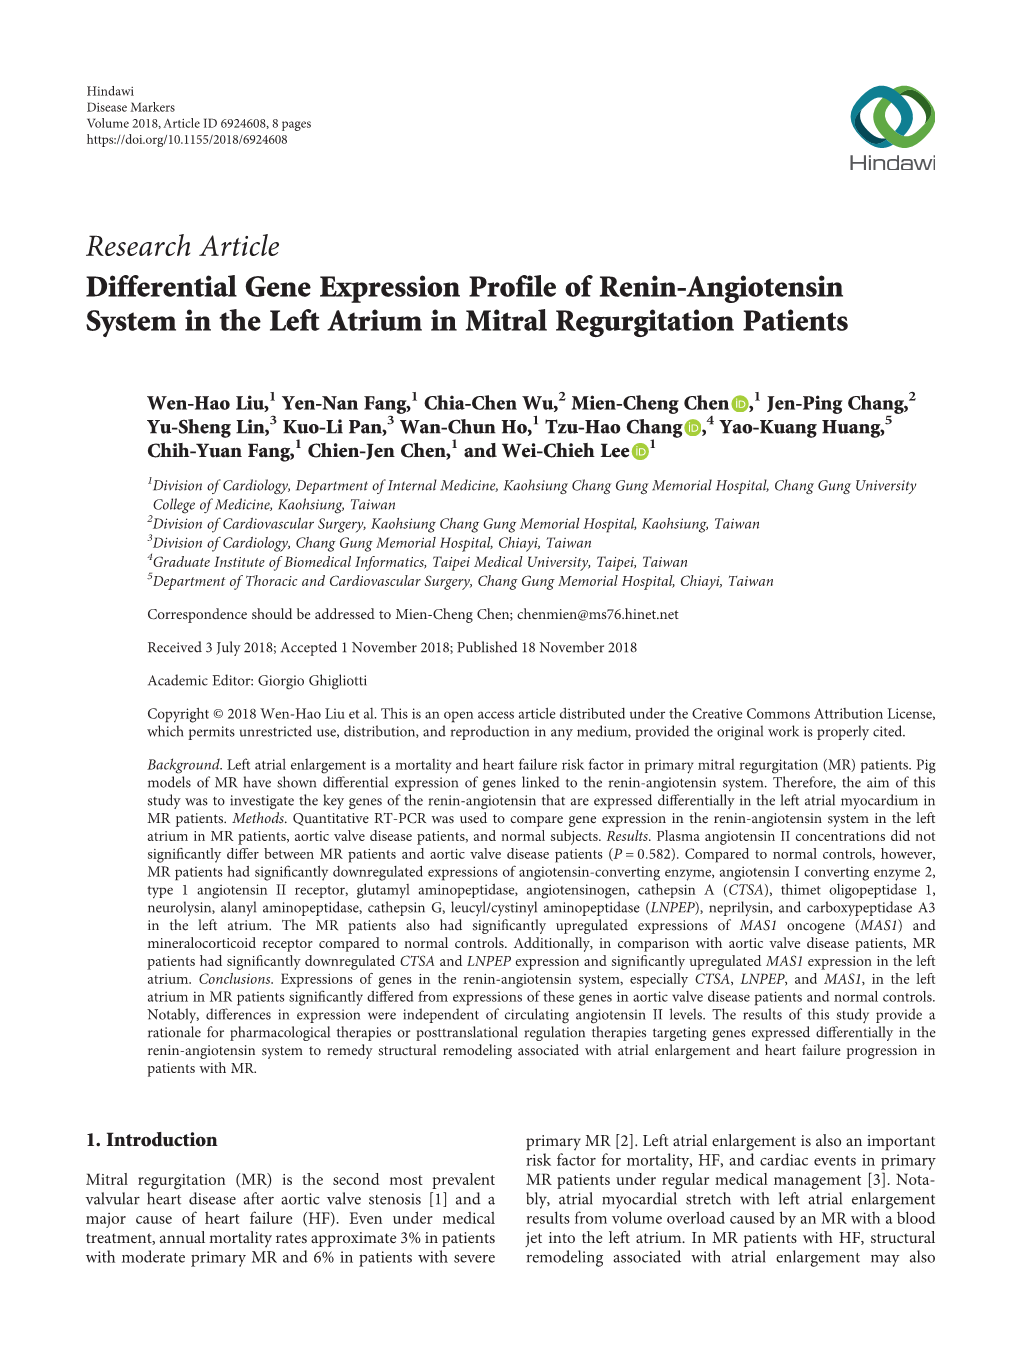 Research Article Differential Gene Expression Profile of Renin-Angiotensin System in the Left Atrium in Mitral Regurgitation Patients